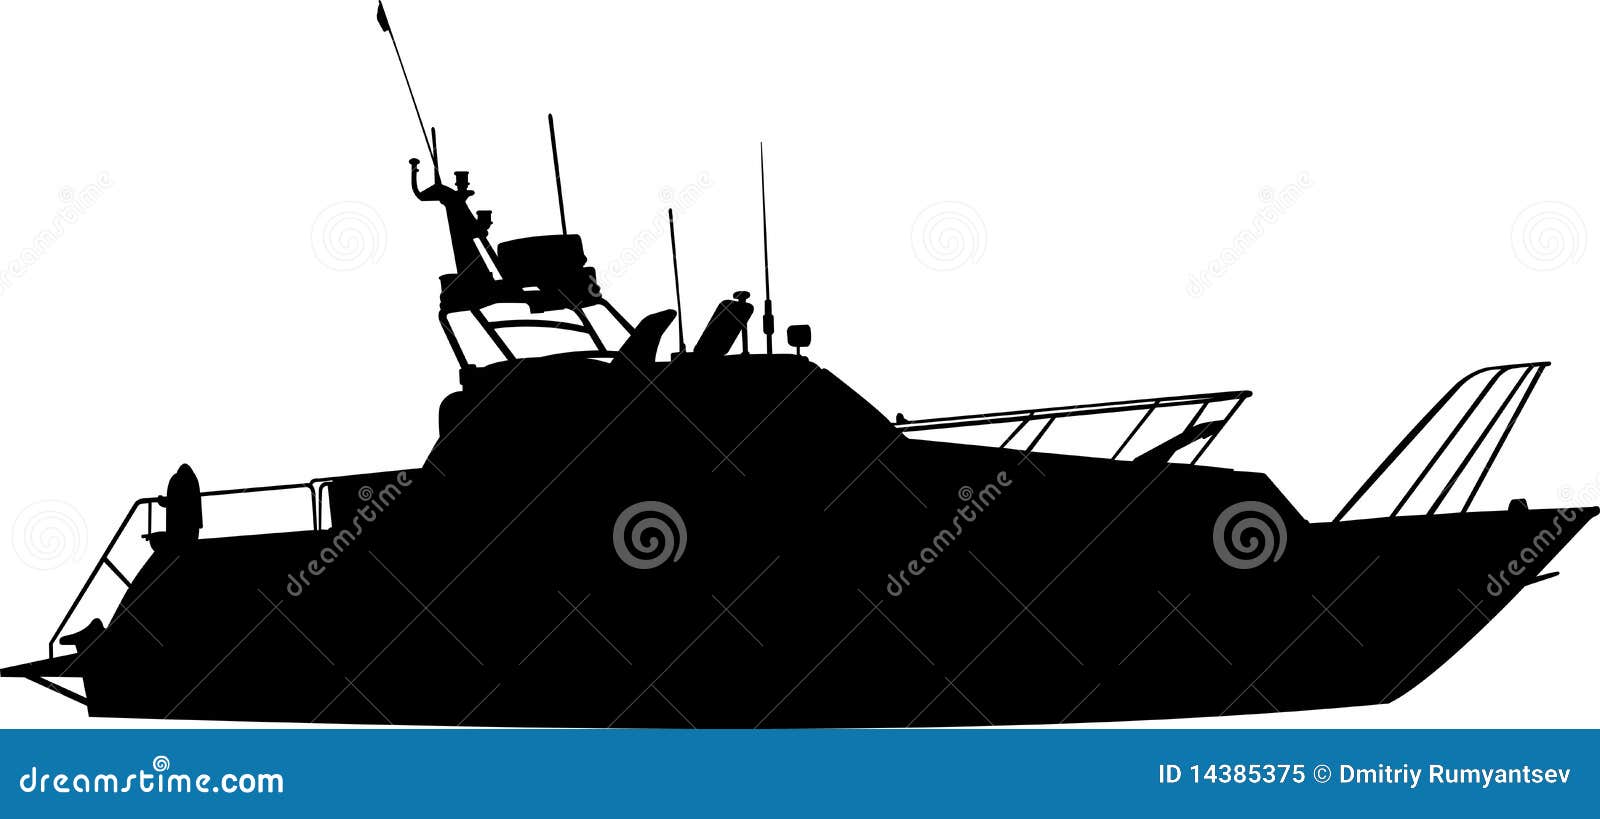 Download Silhouette of boat (yacht) stock illustration. Illustration of black - 14385375